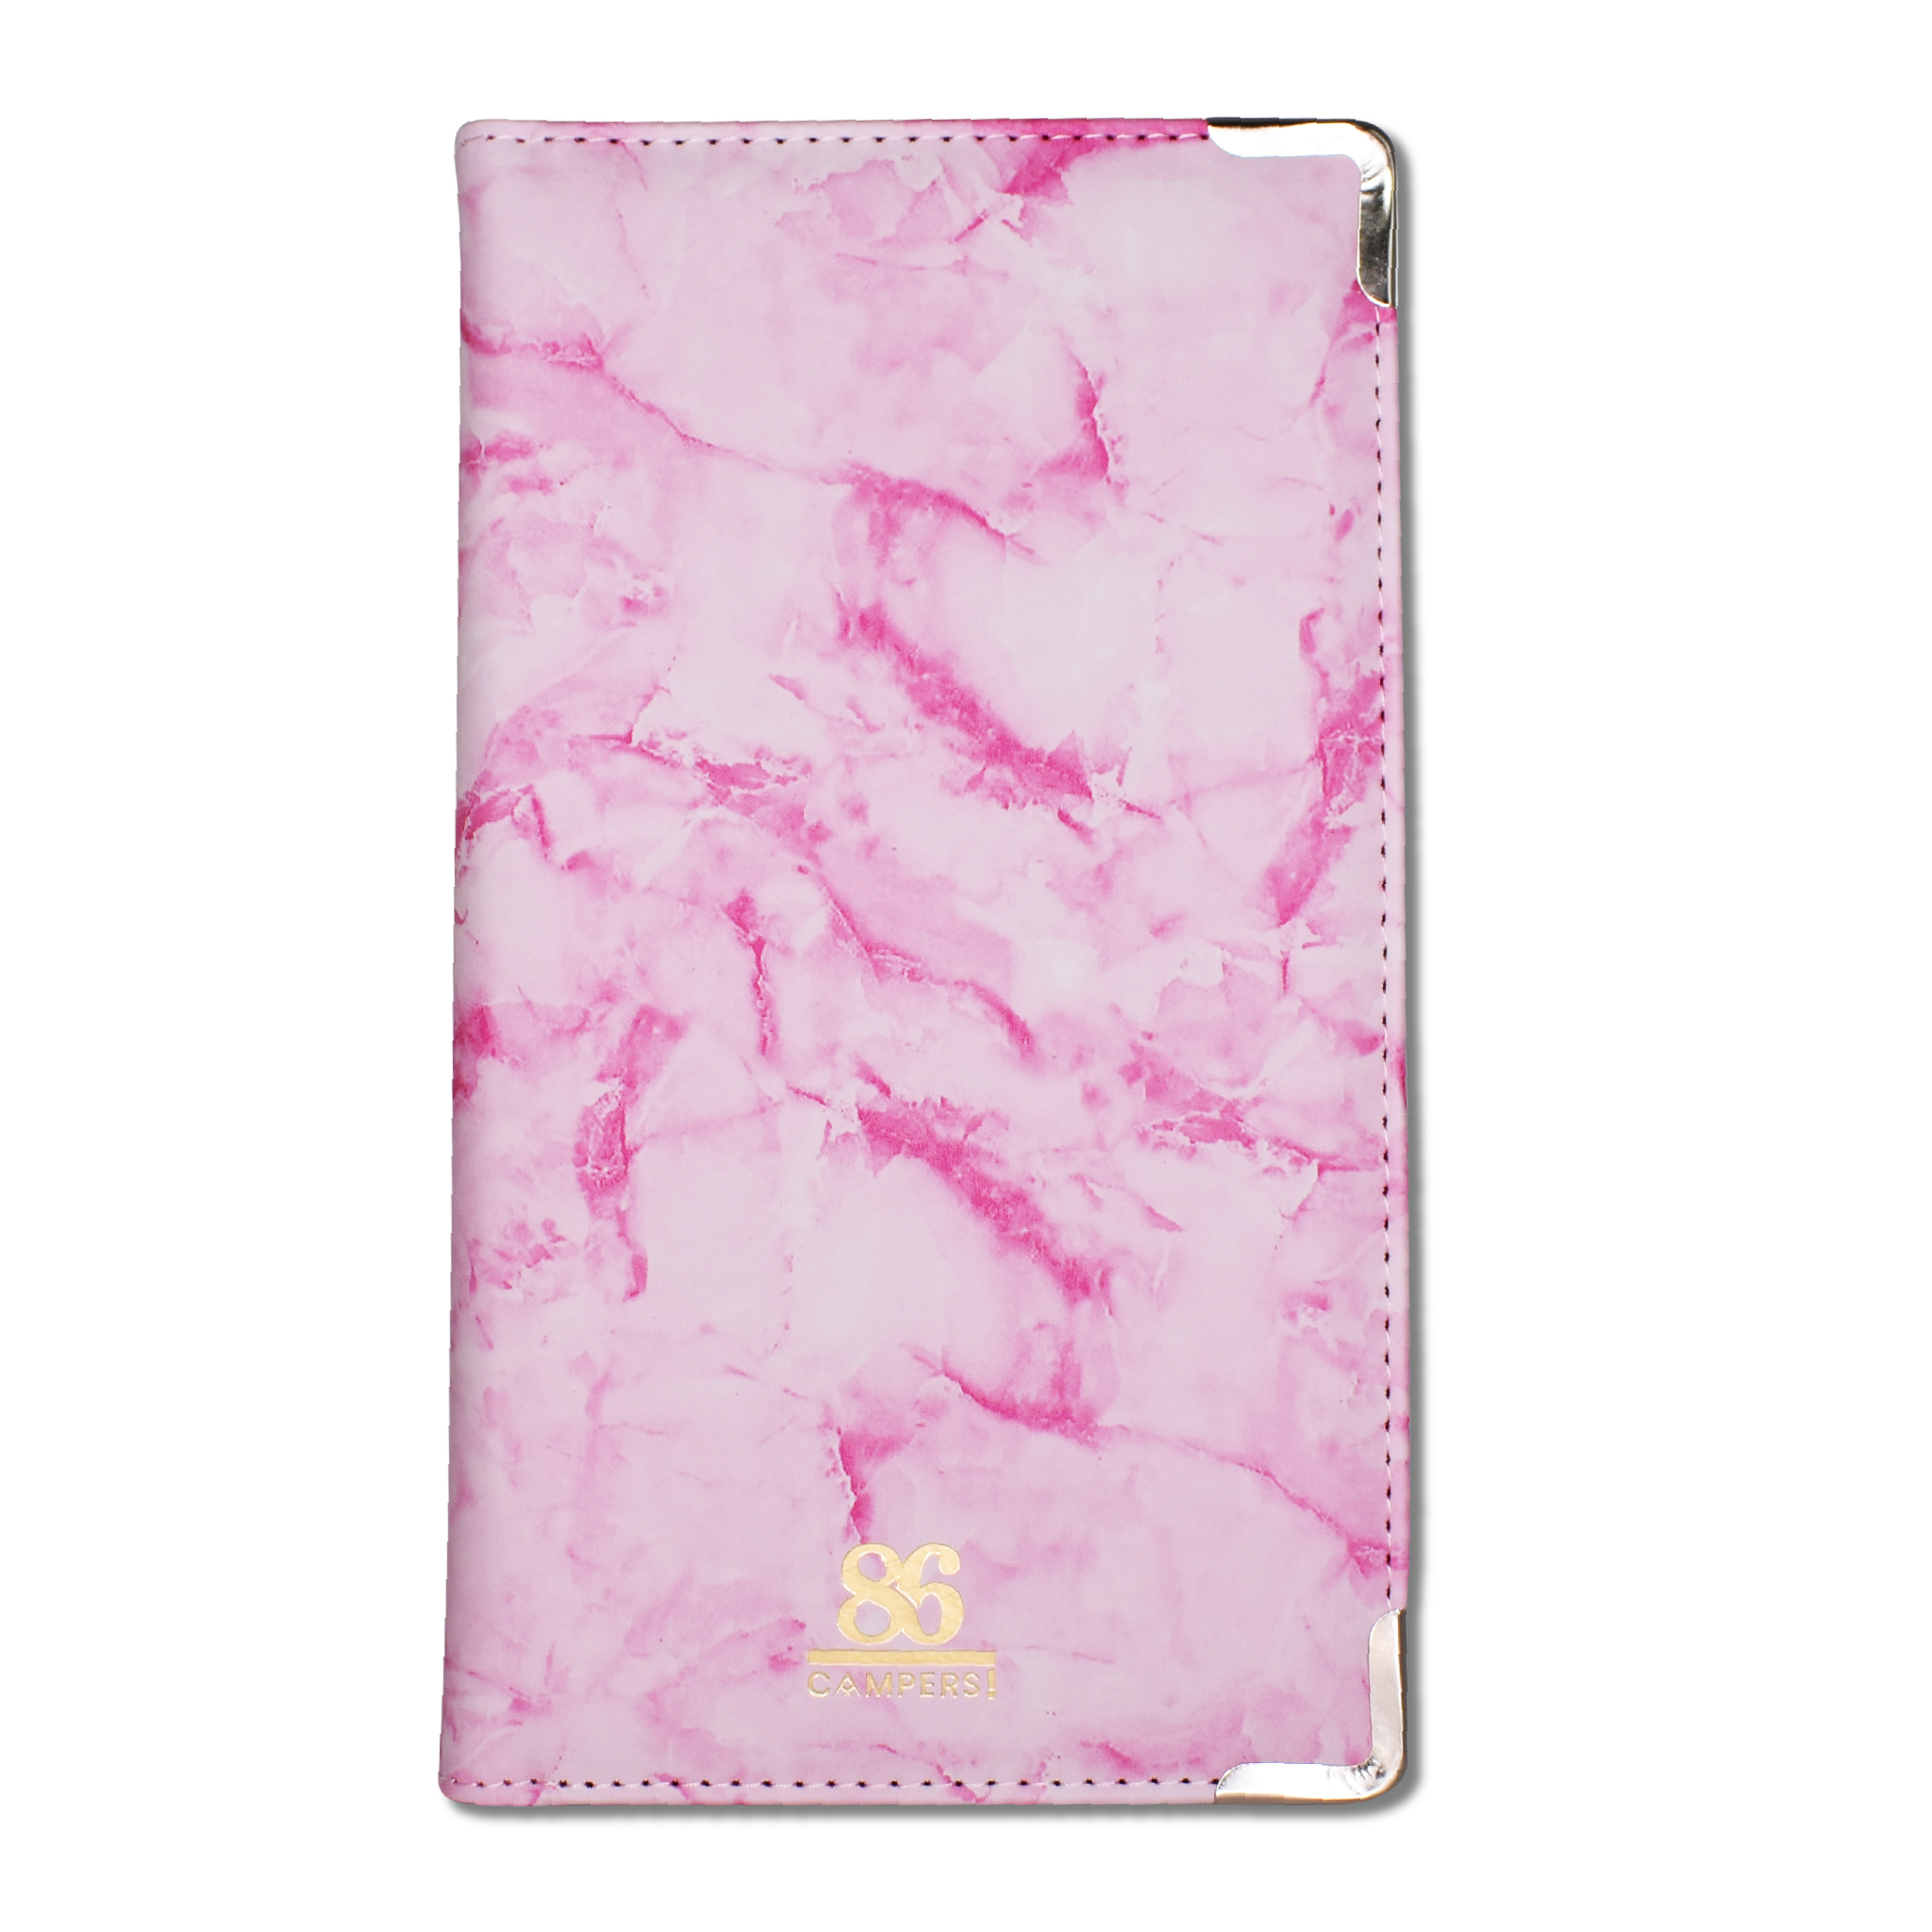 Mymazn 5x9'' Mermaid Pink Server Book with Zipper&Magnetic